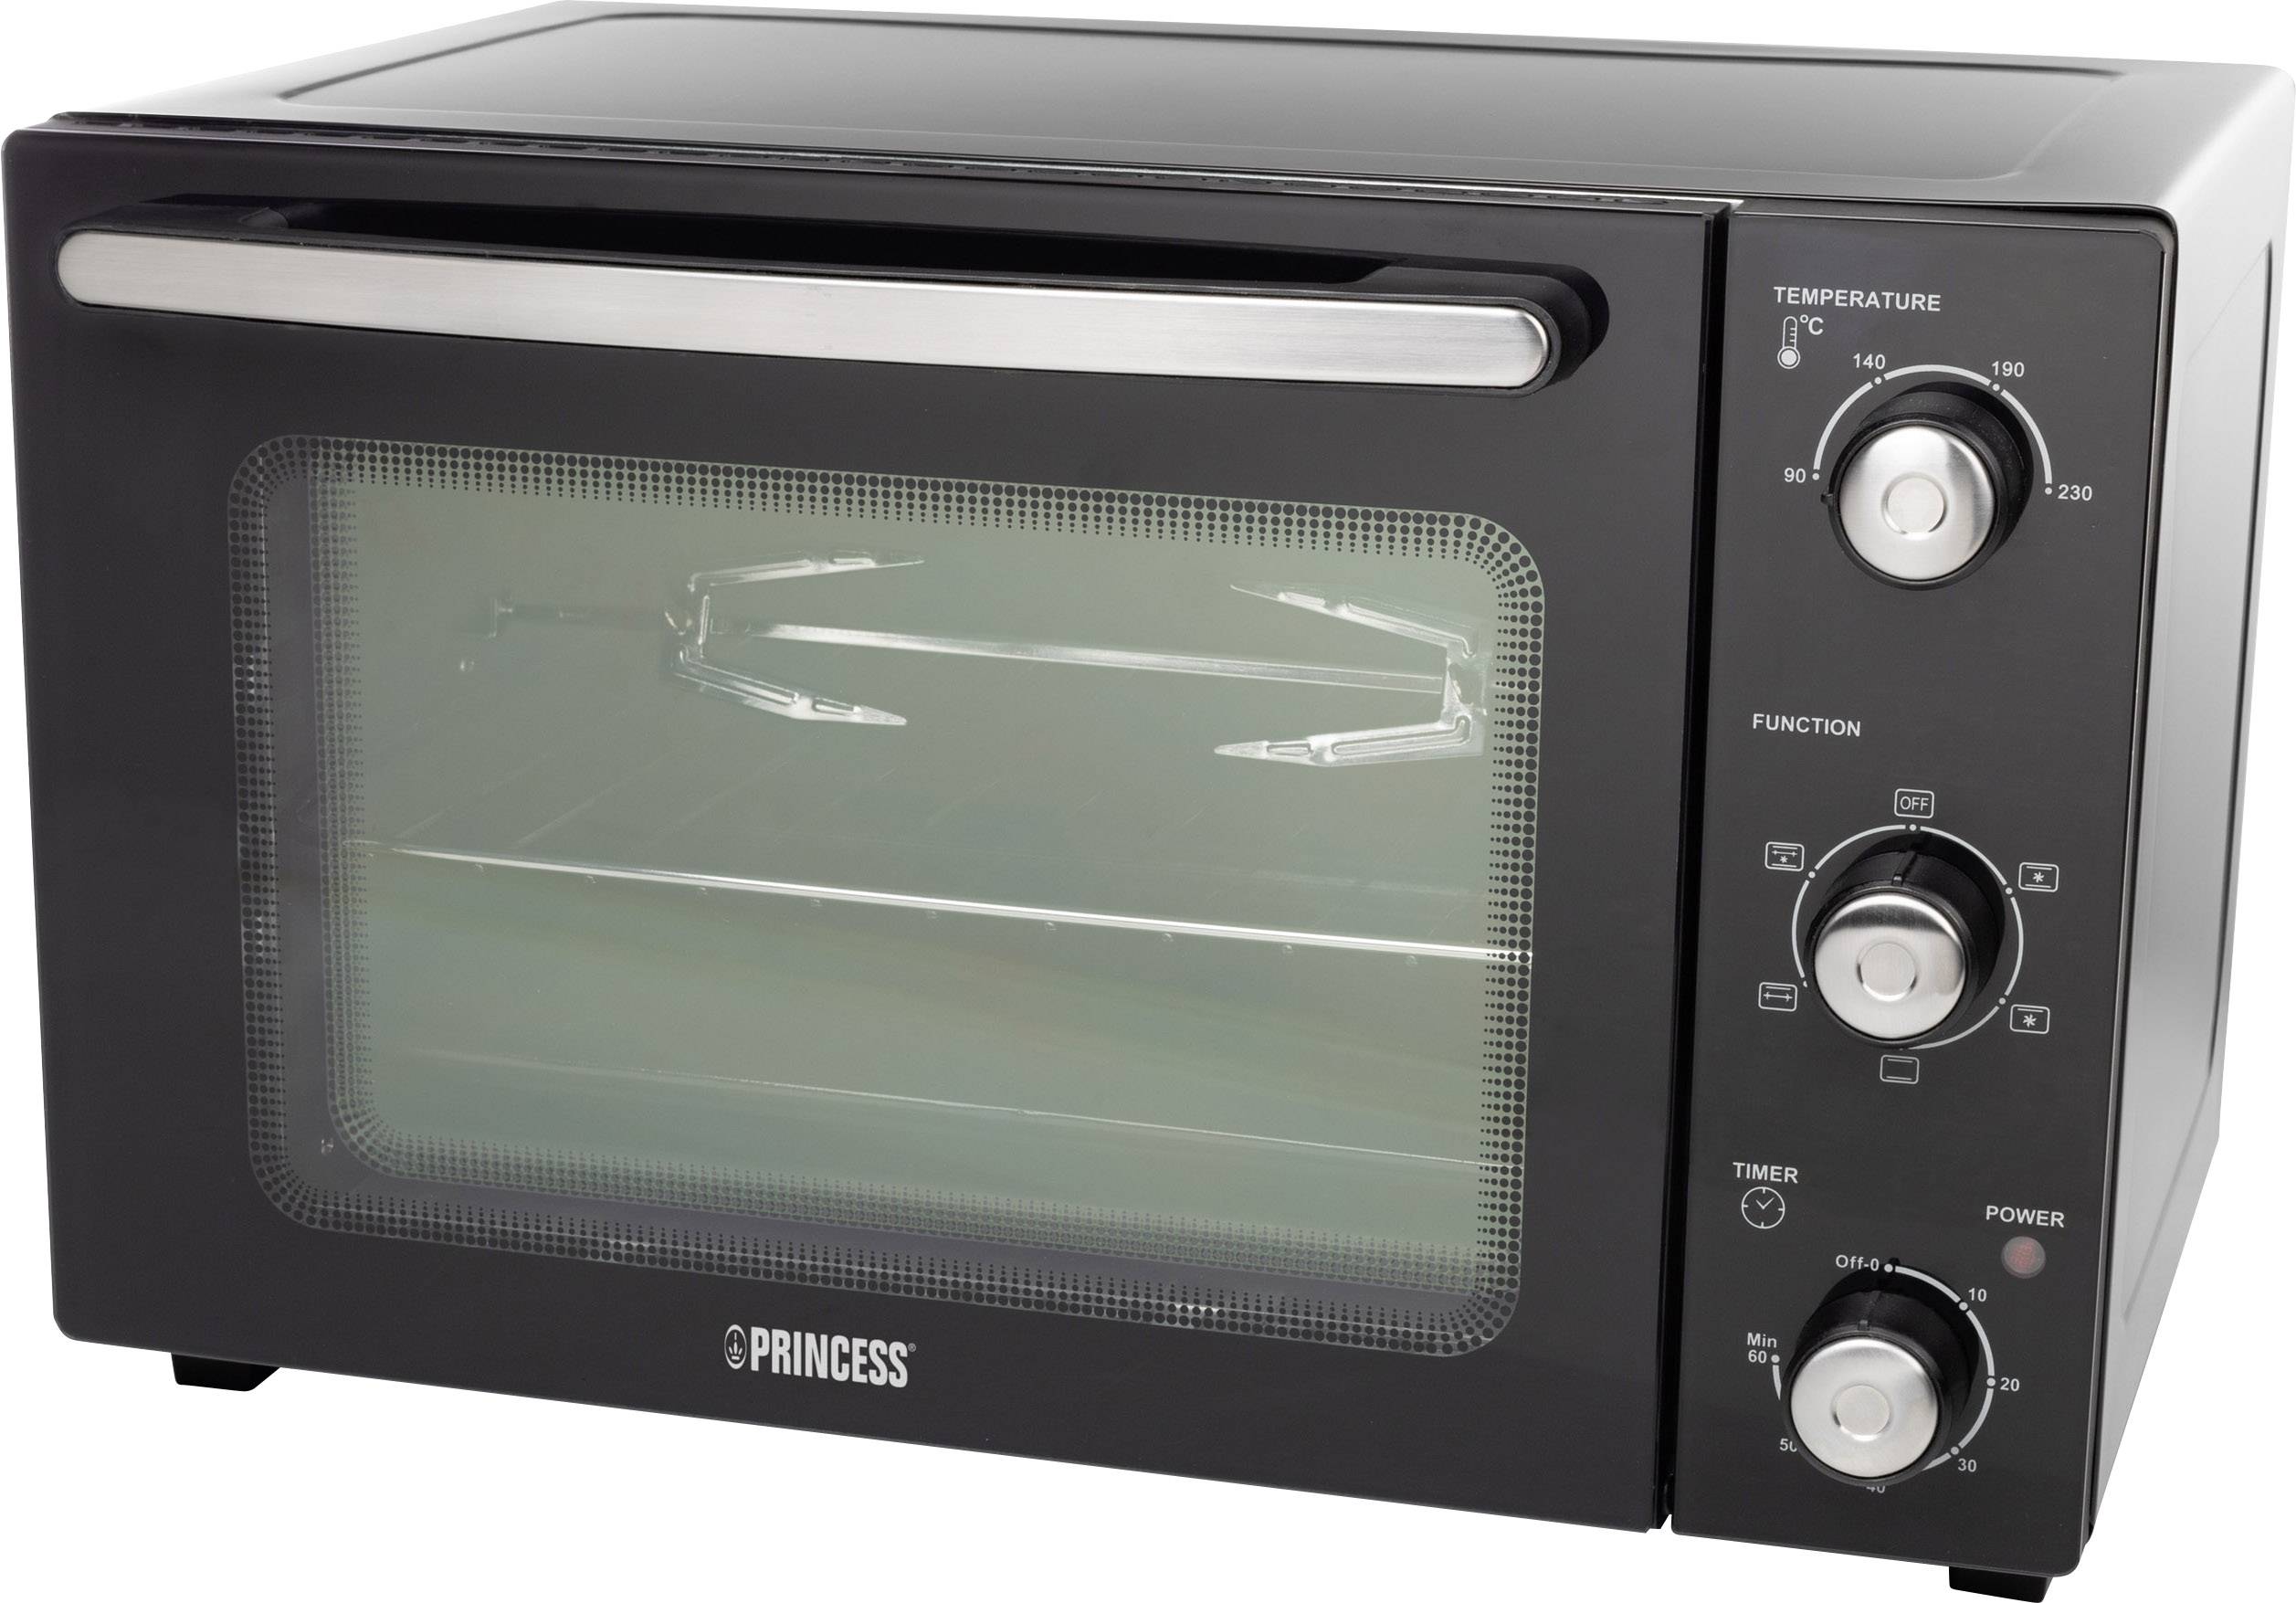 Vervormen Vakman Aarde Princess 01.112751.01.001 Mini oven with manual temperature settings, Timer  fuction, with convection, corded 32 l | Conrad.com